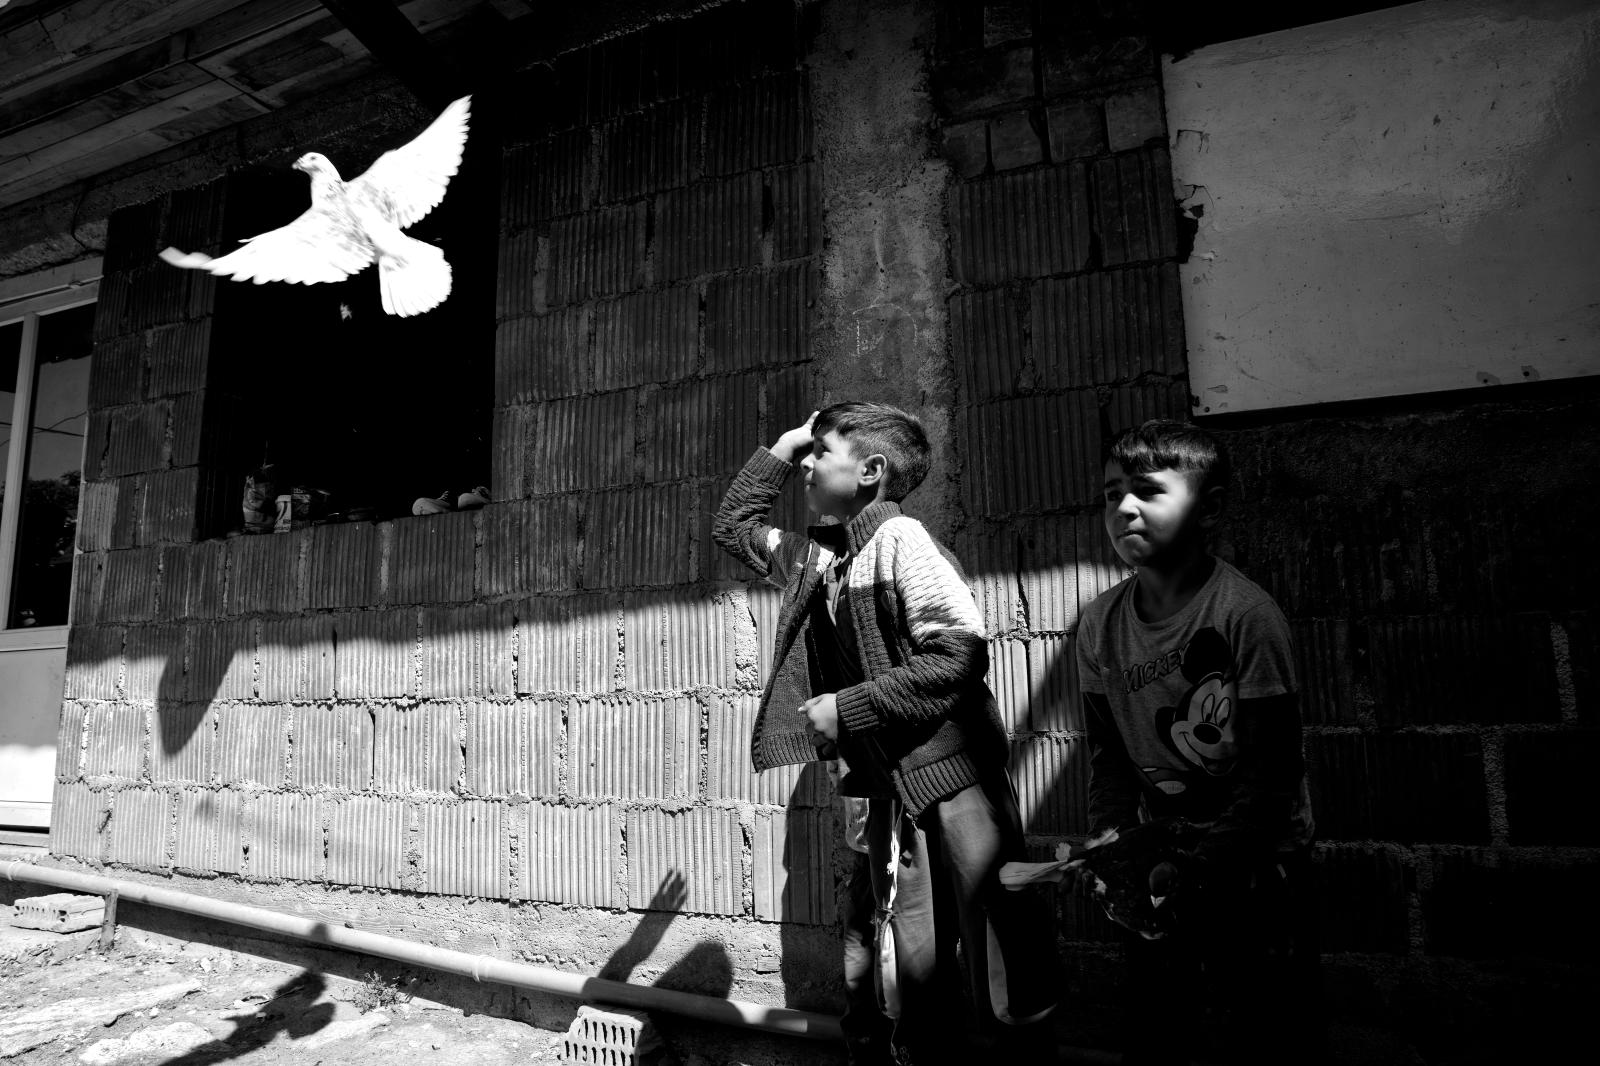 Gipsy freedom | Buy this image